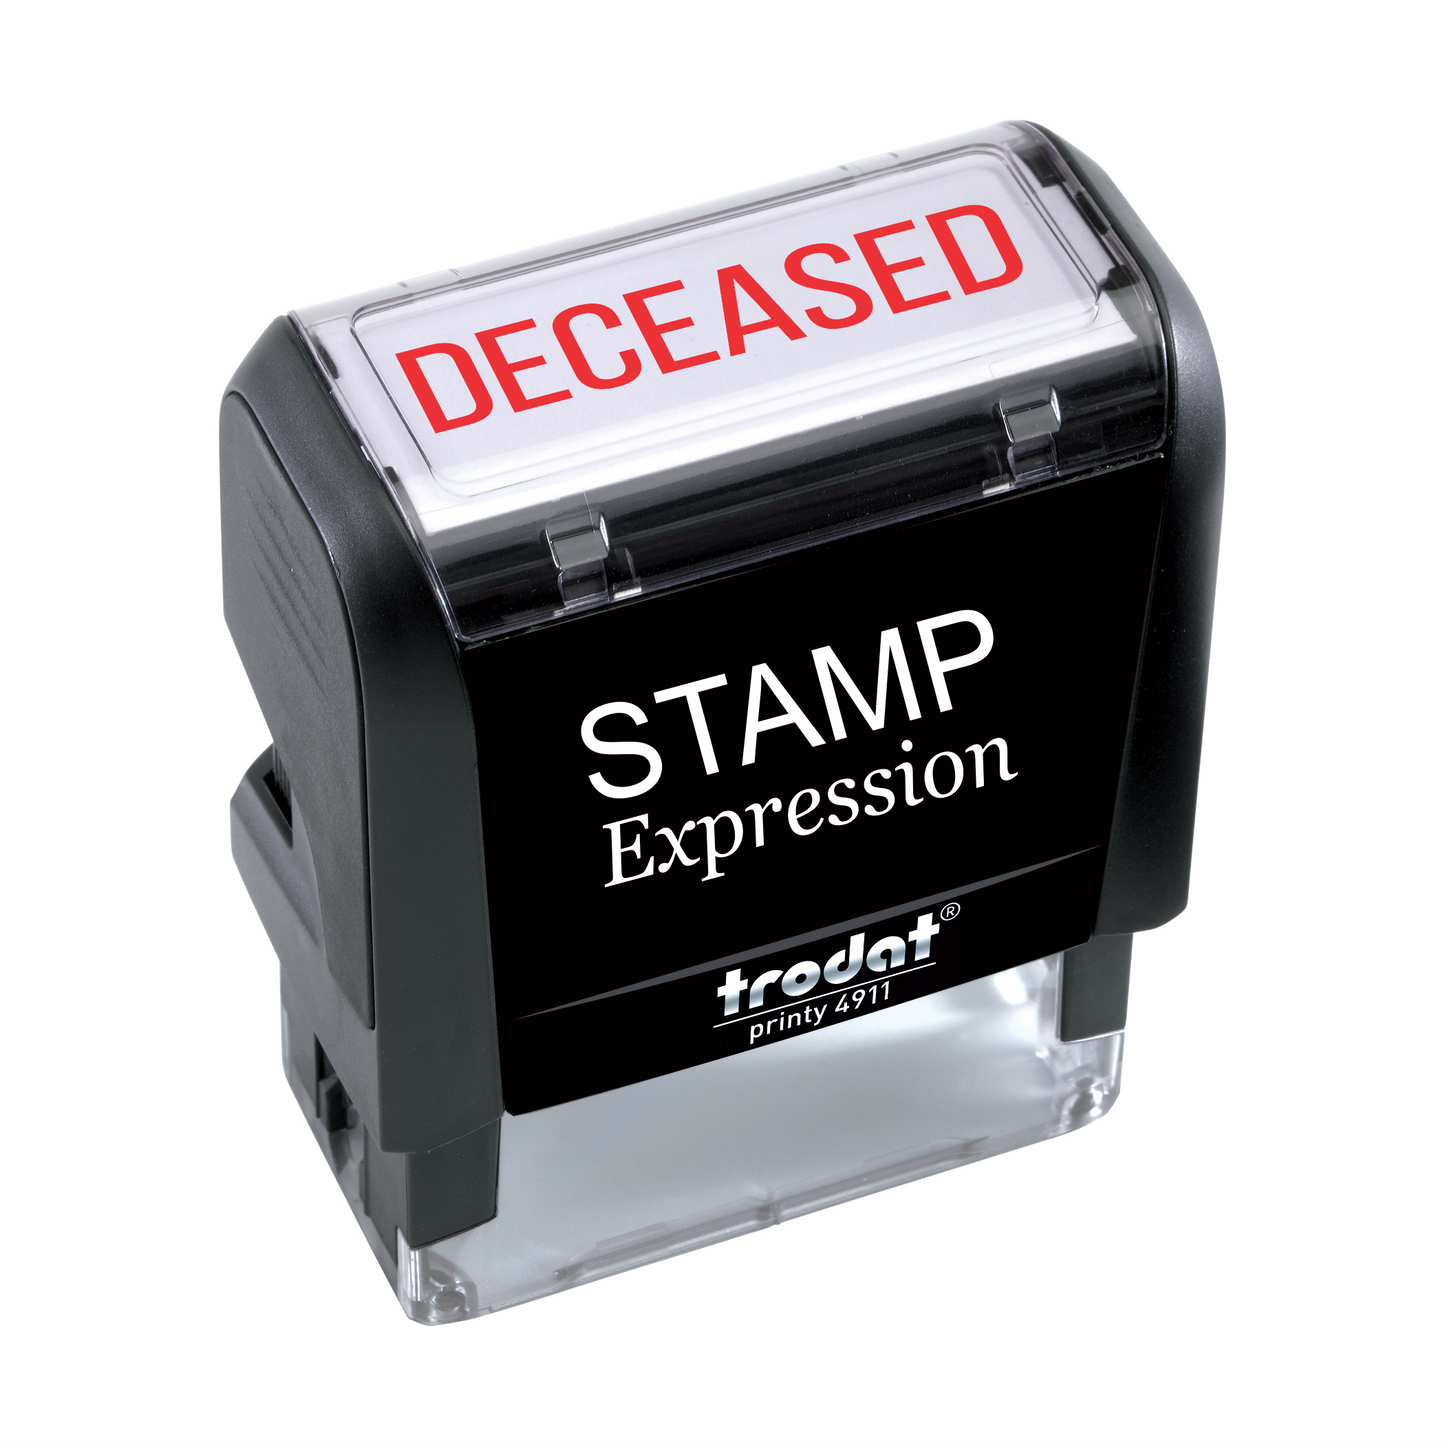 DECEASED Office Self Inking Rubber Stamp (SH-5252)